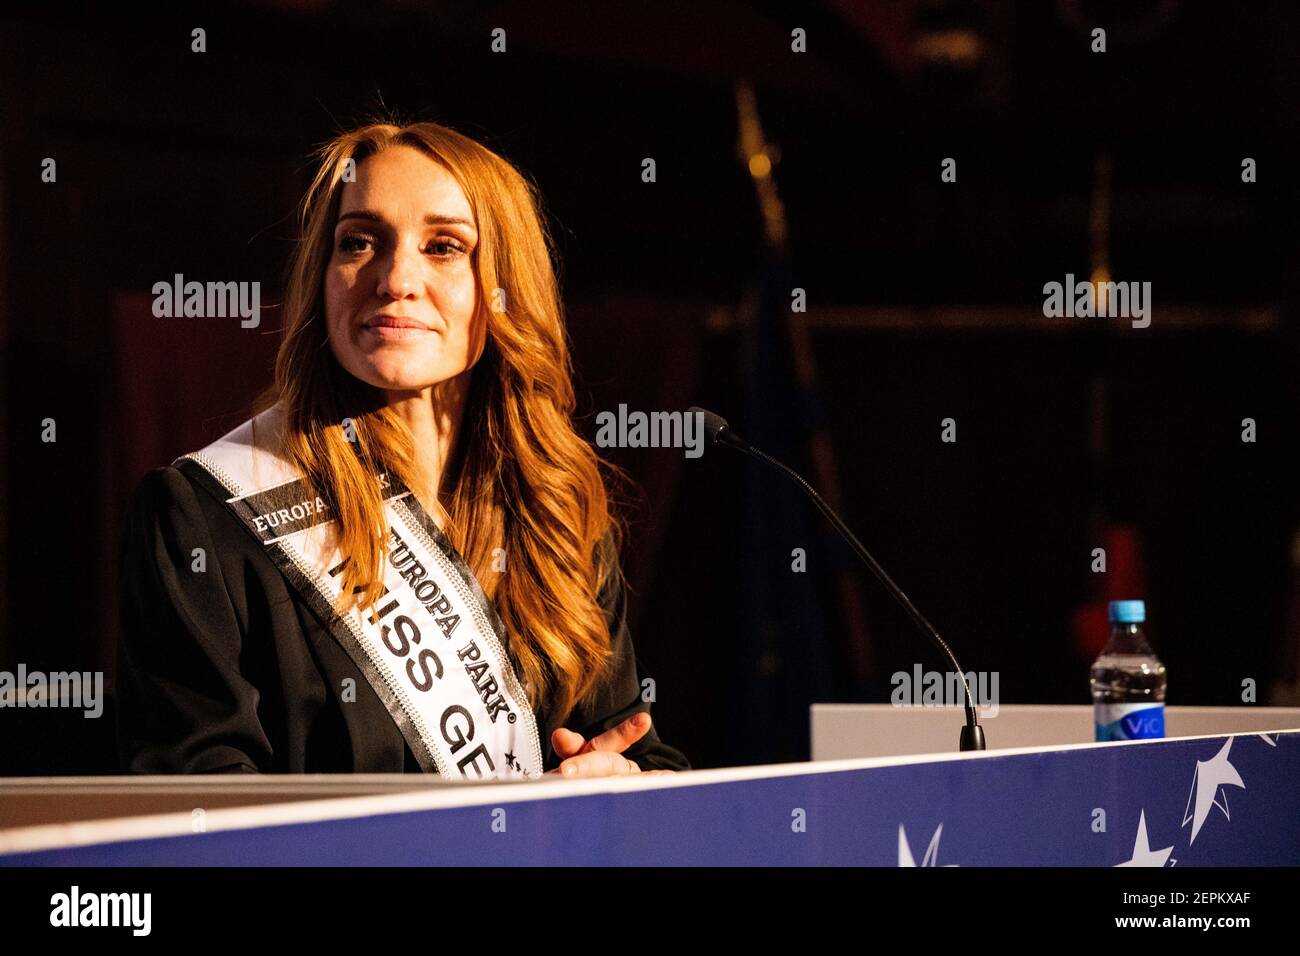 Rust, Germany. 27th Feb, 2021. Anja Kallenbach, Miss Germany 2021 sits on the podium during a press conference after her election. 16 candidates from all federal states faced the predominantly female jury for the election of Miss Germany 2021. The motto was #EmpoweringAuthenticWomen. According to the organizers, the competition should no longer be primarily about beauty, but about the ability to motivate others and send an individual message. Credit: Philipp von Ditfurth/dpa/Alamy Live News Stock Photo